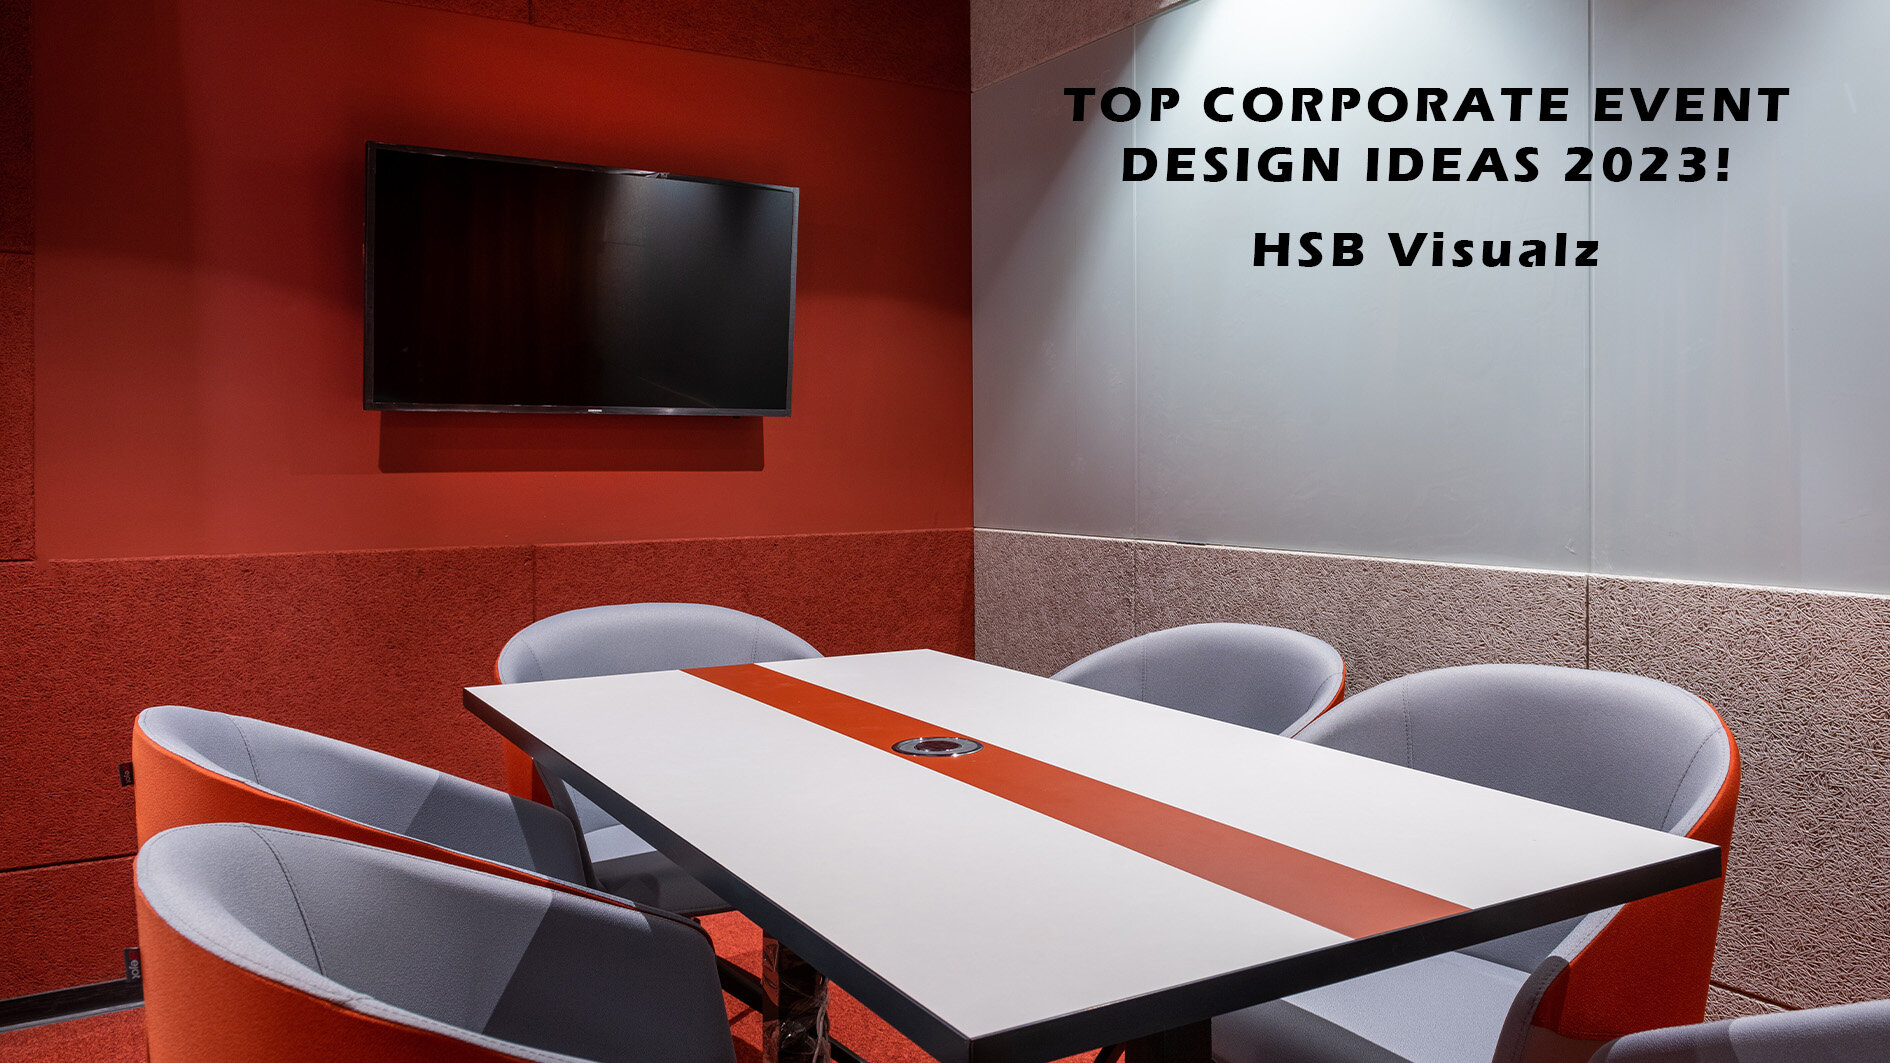 FRIDAY READS: TOP CORPORATE EVENT DESIGN IDEAS 2023 - HSB VISUALZ 📸🎥

Organizing a successful corporate event can be a daunting task, but it can be made easy by incorporating some unique event design ideas. At HSB Visualz, we specialize in corporat